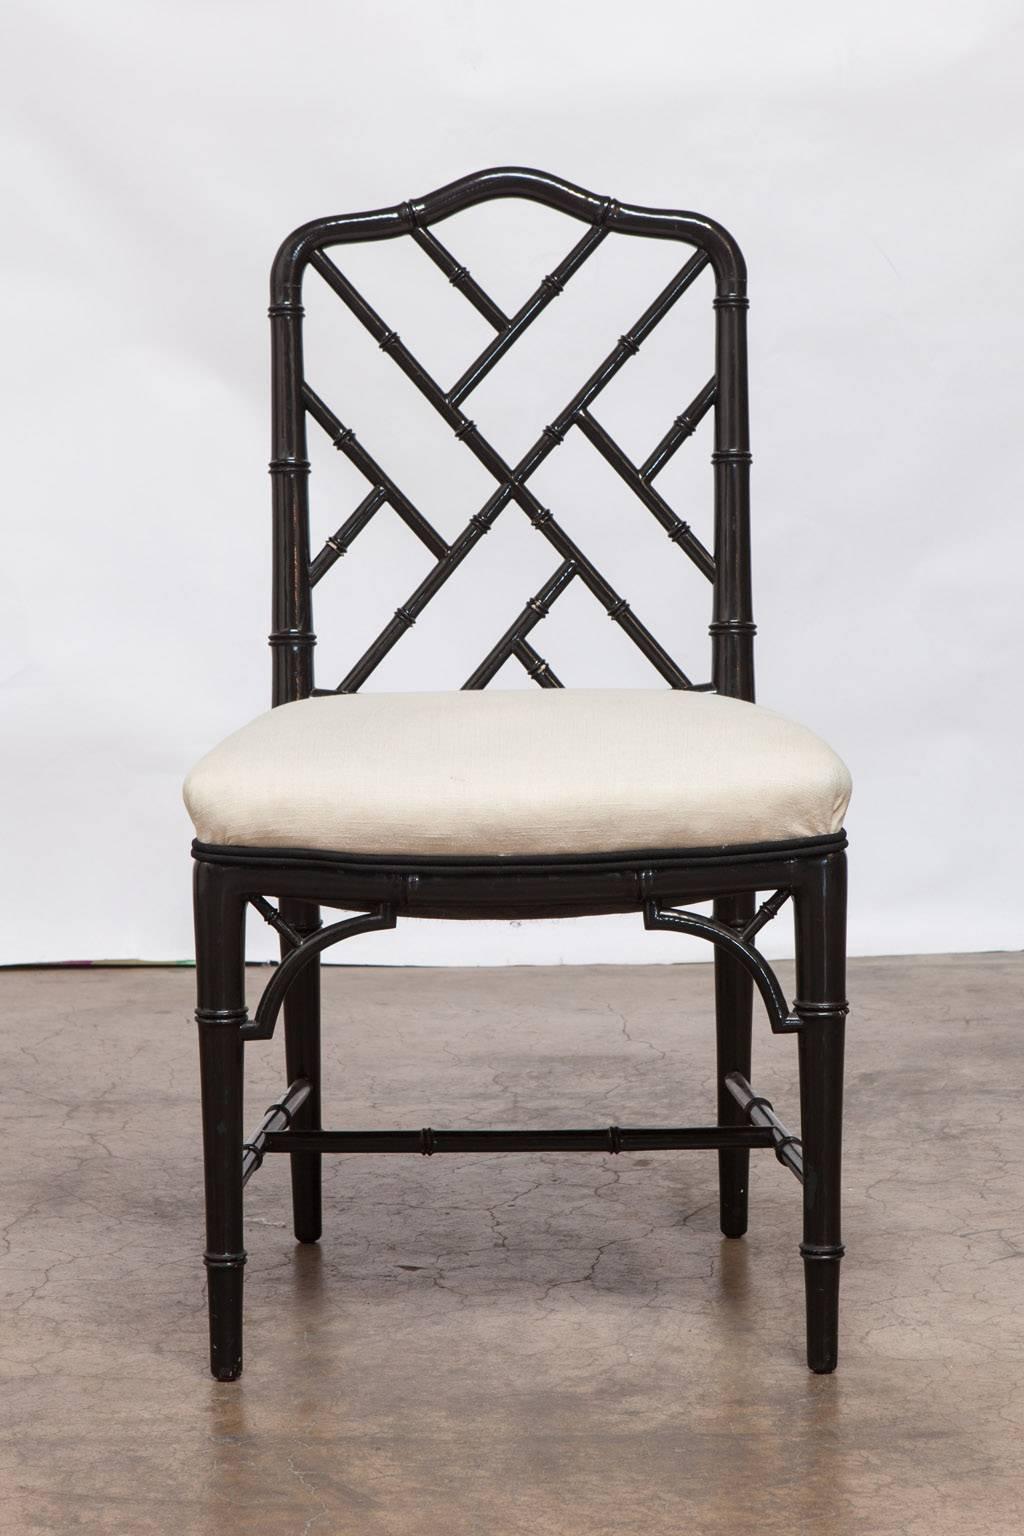 Stylish set of four faux bamboo dining chairs made in the Chinese Chippendale taste featuring a black lacquer finish. Upholstered in a cream color linen with a black double welt. Intricately carved frames with an open fretwork back and decorative